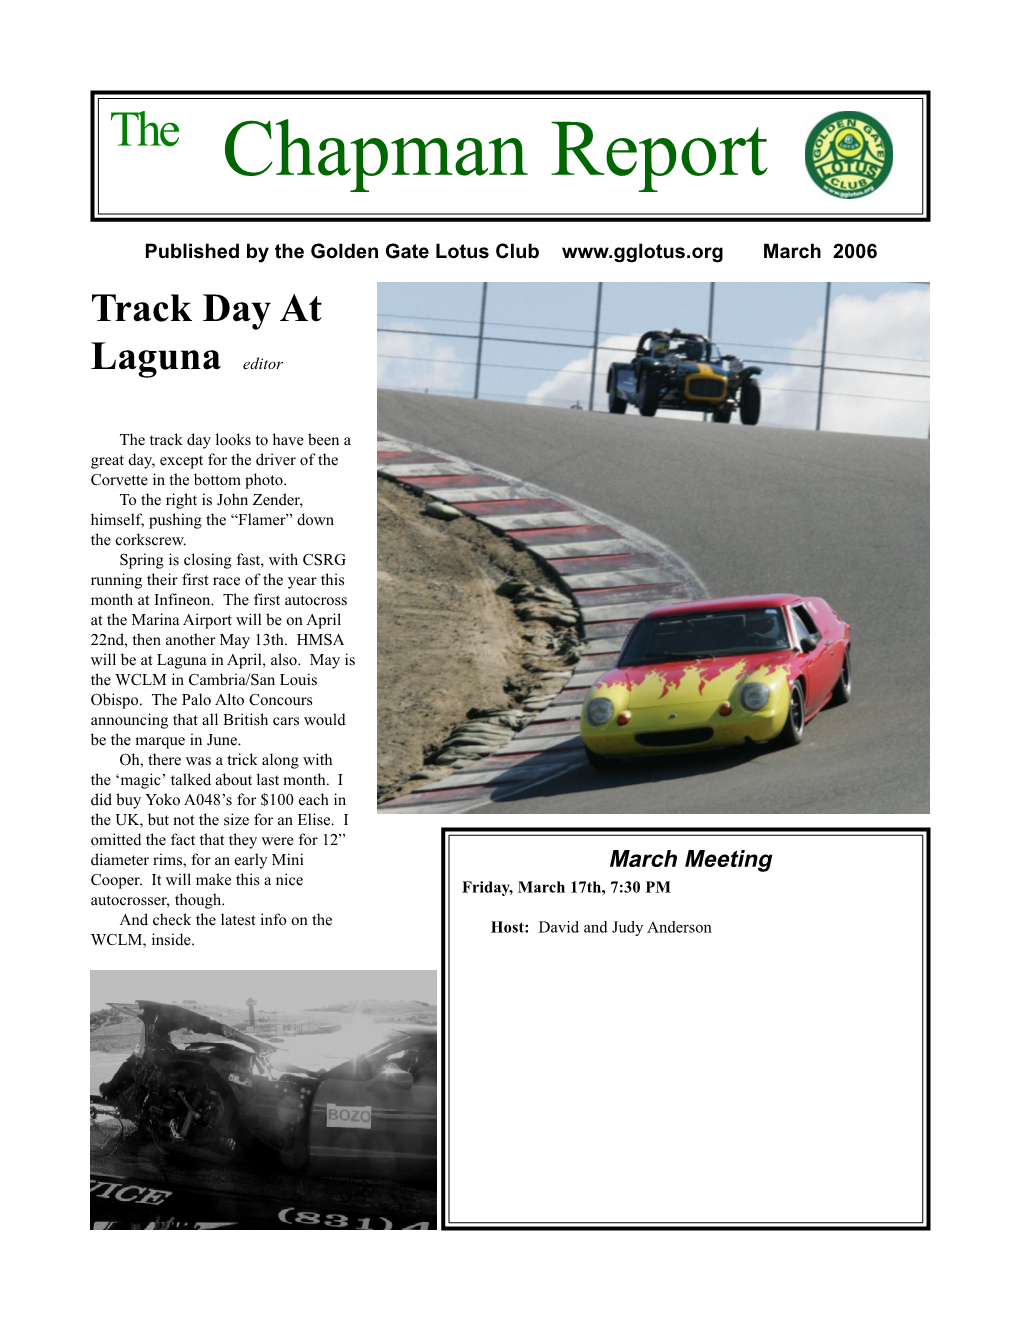 March 2006 Track Day At